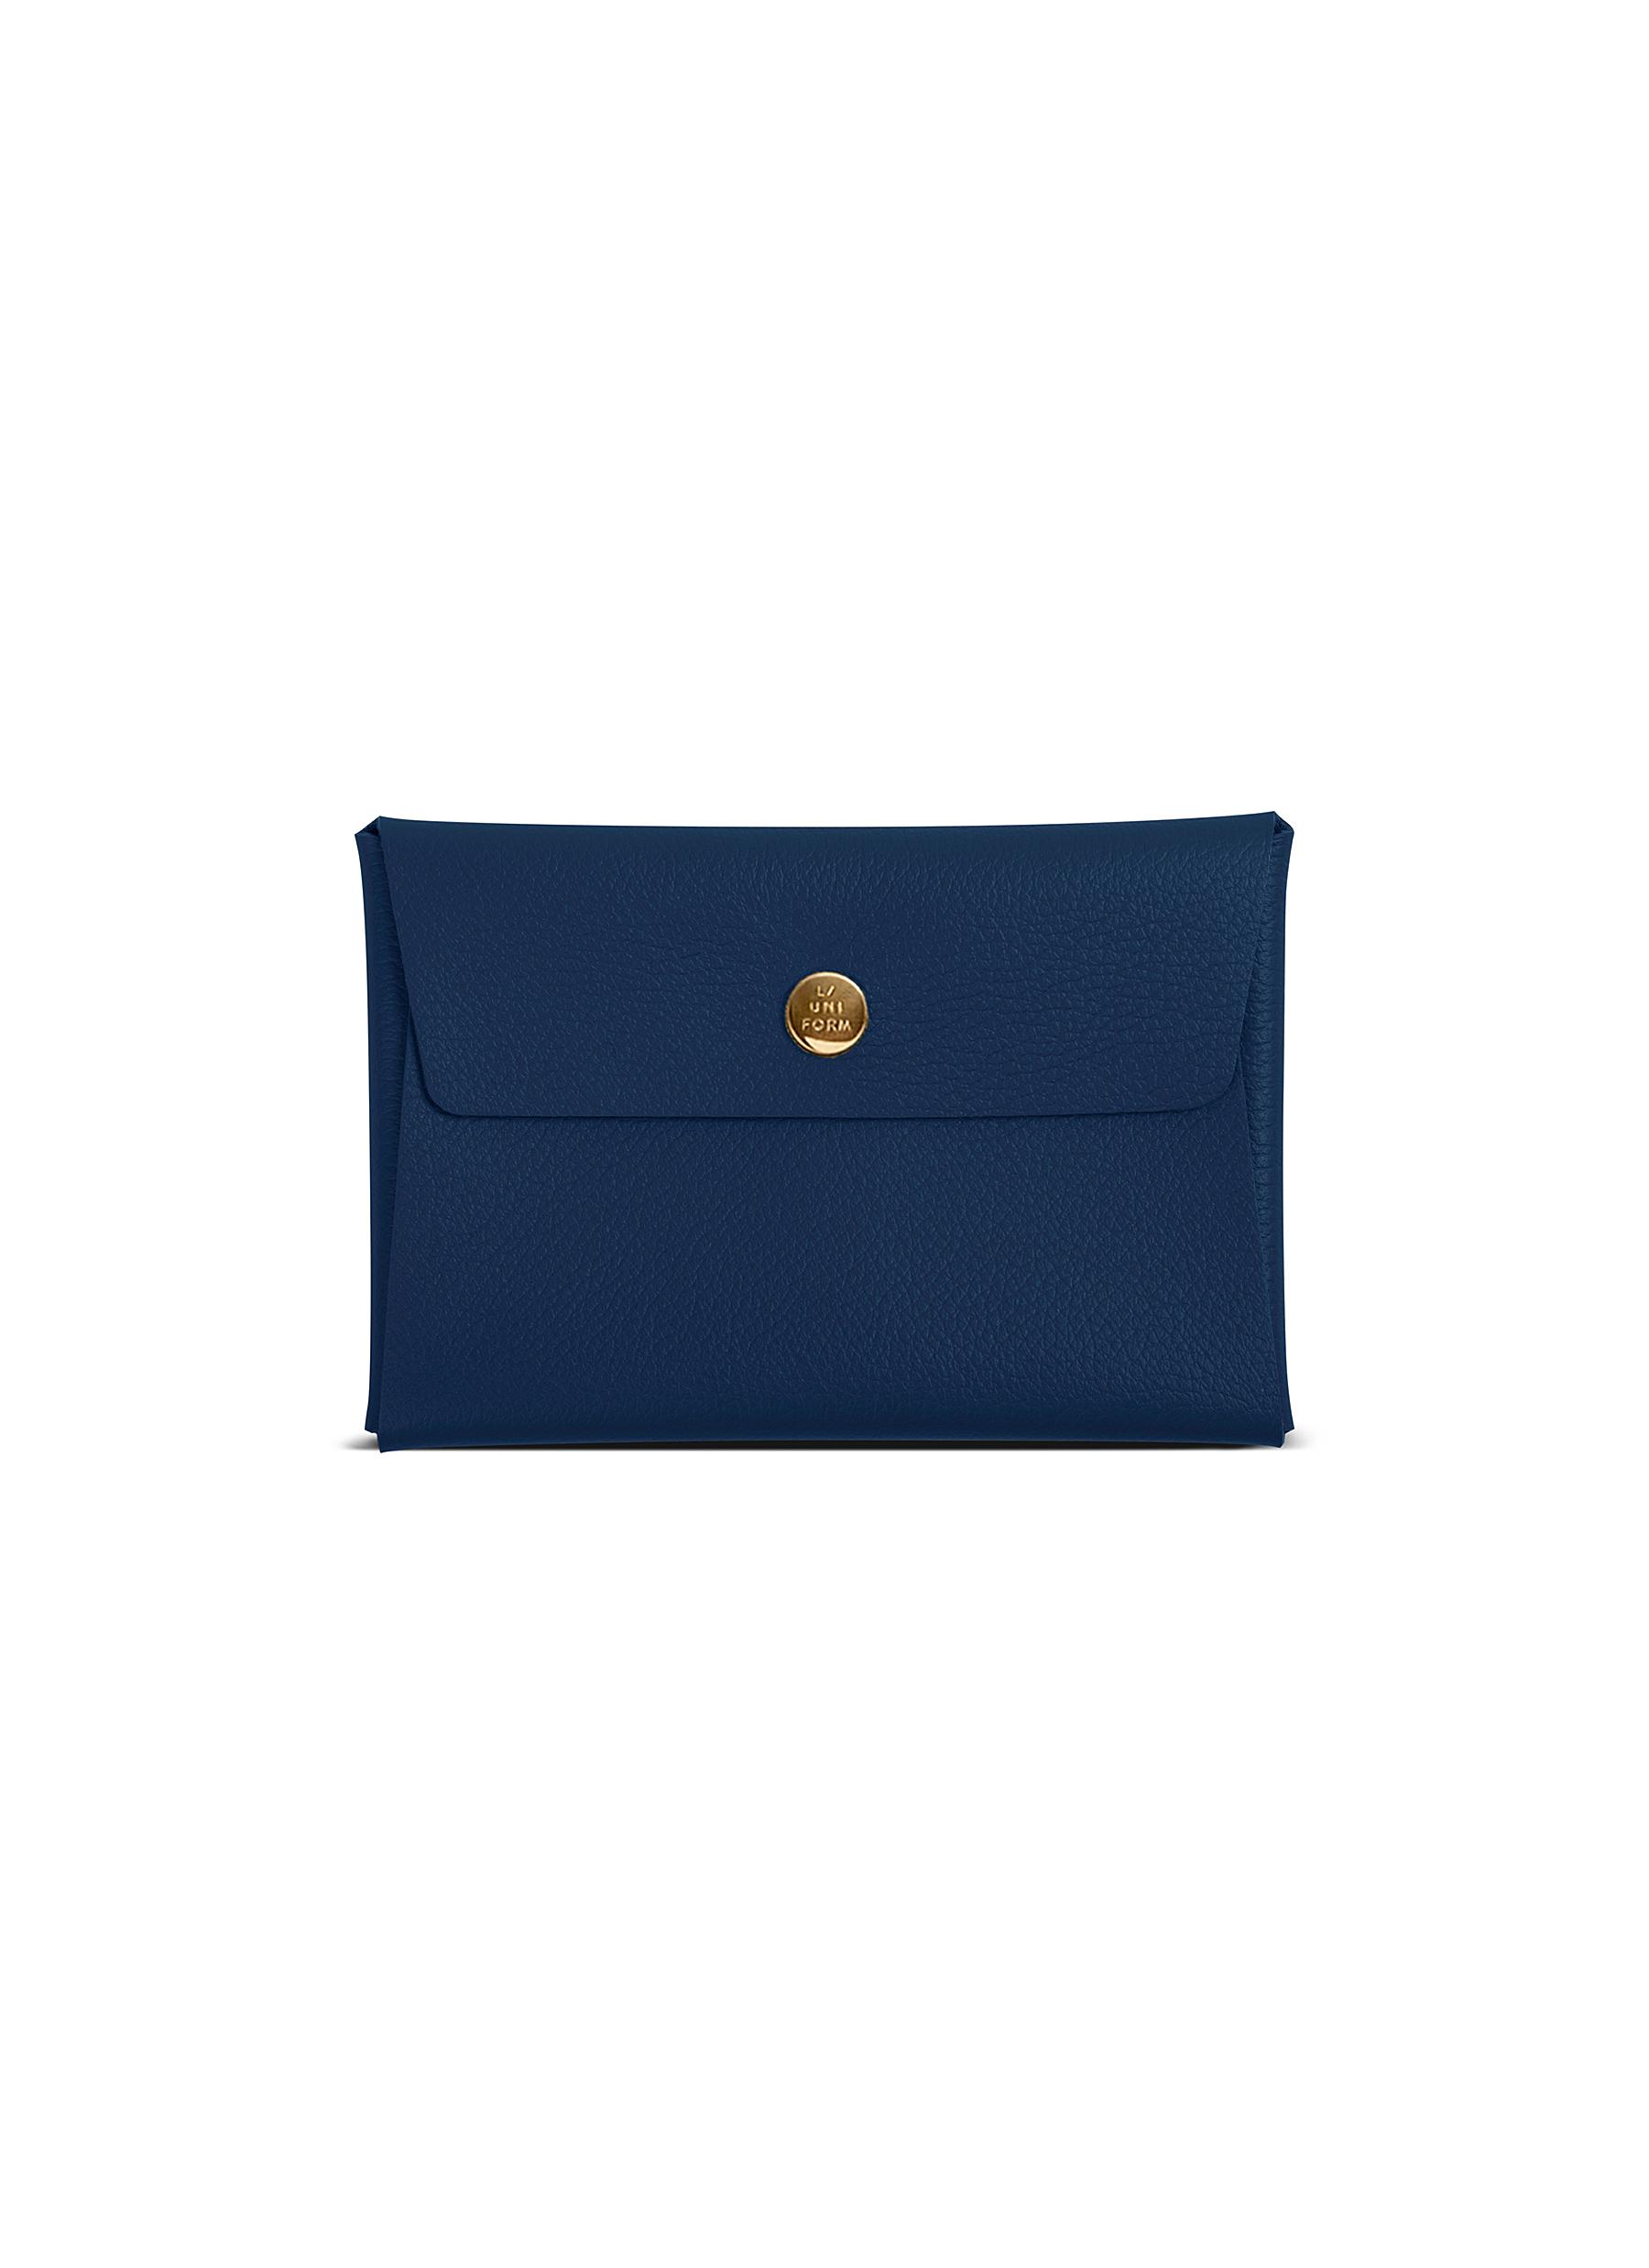 Small Leather Envelope N°81